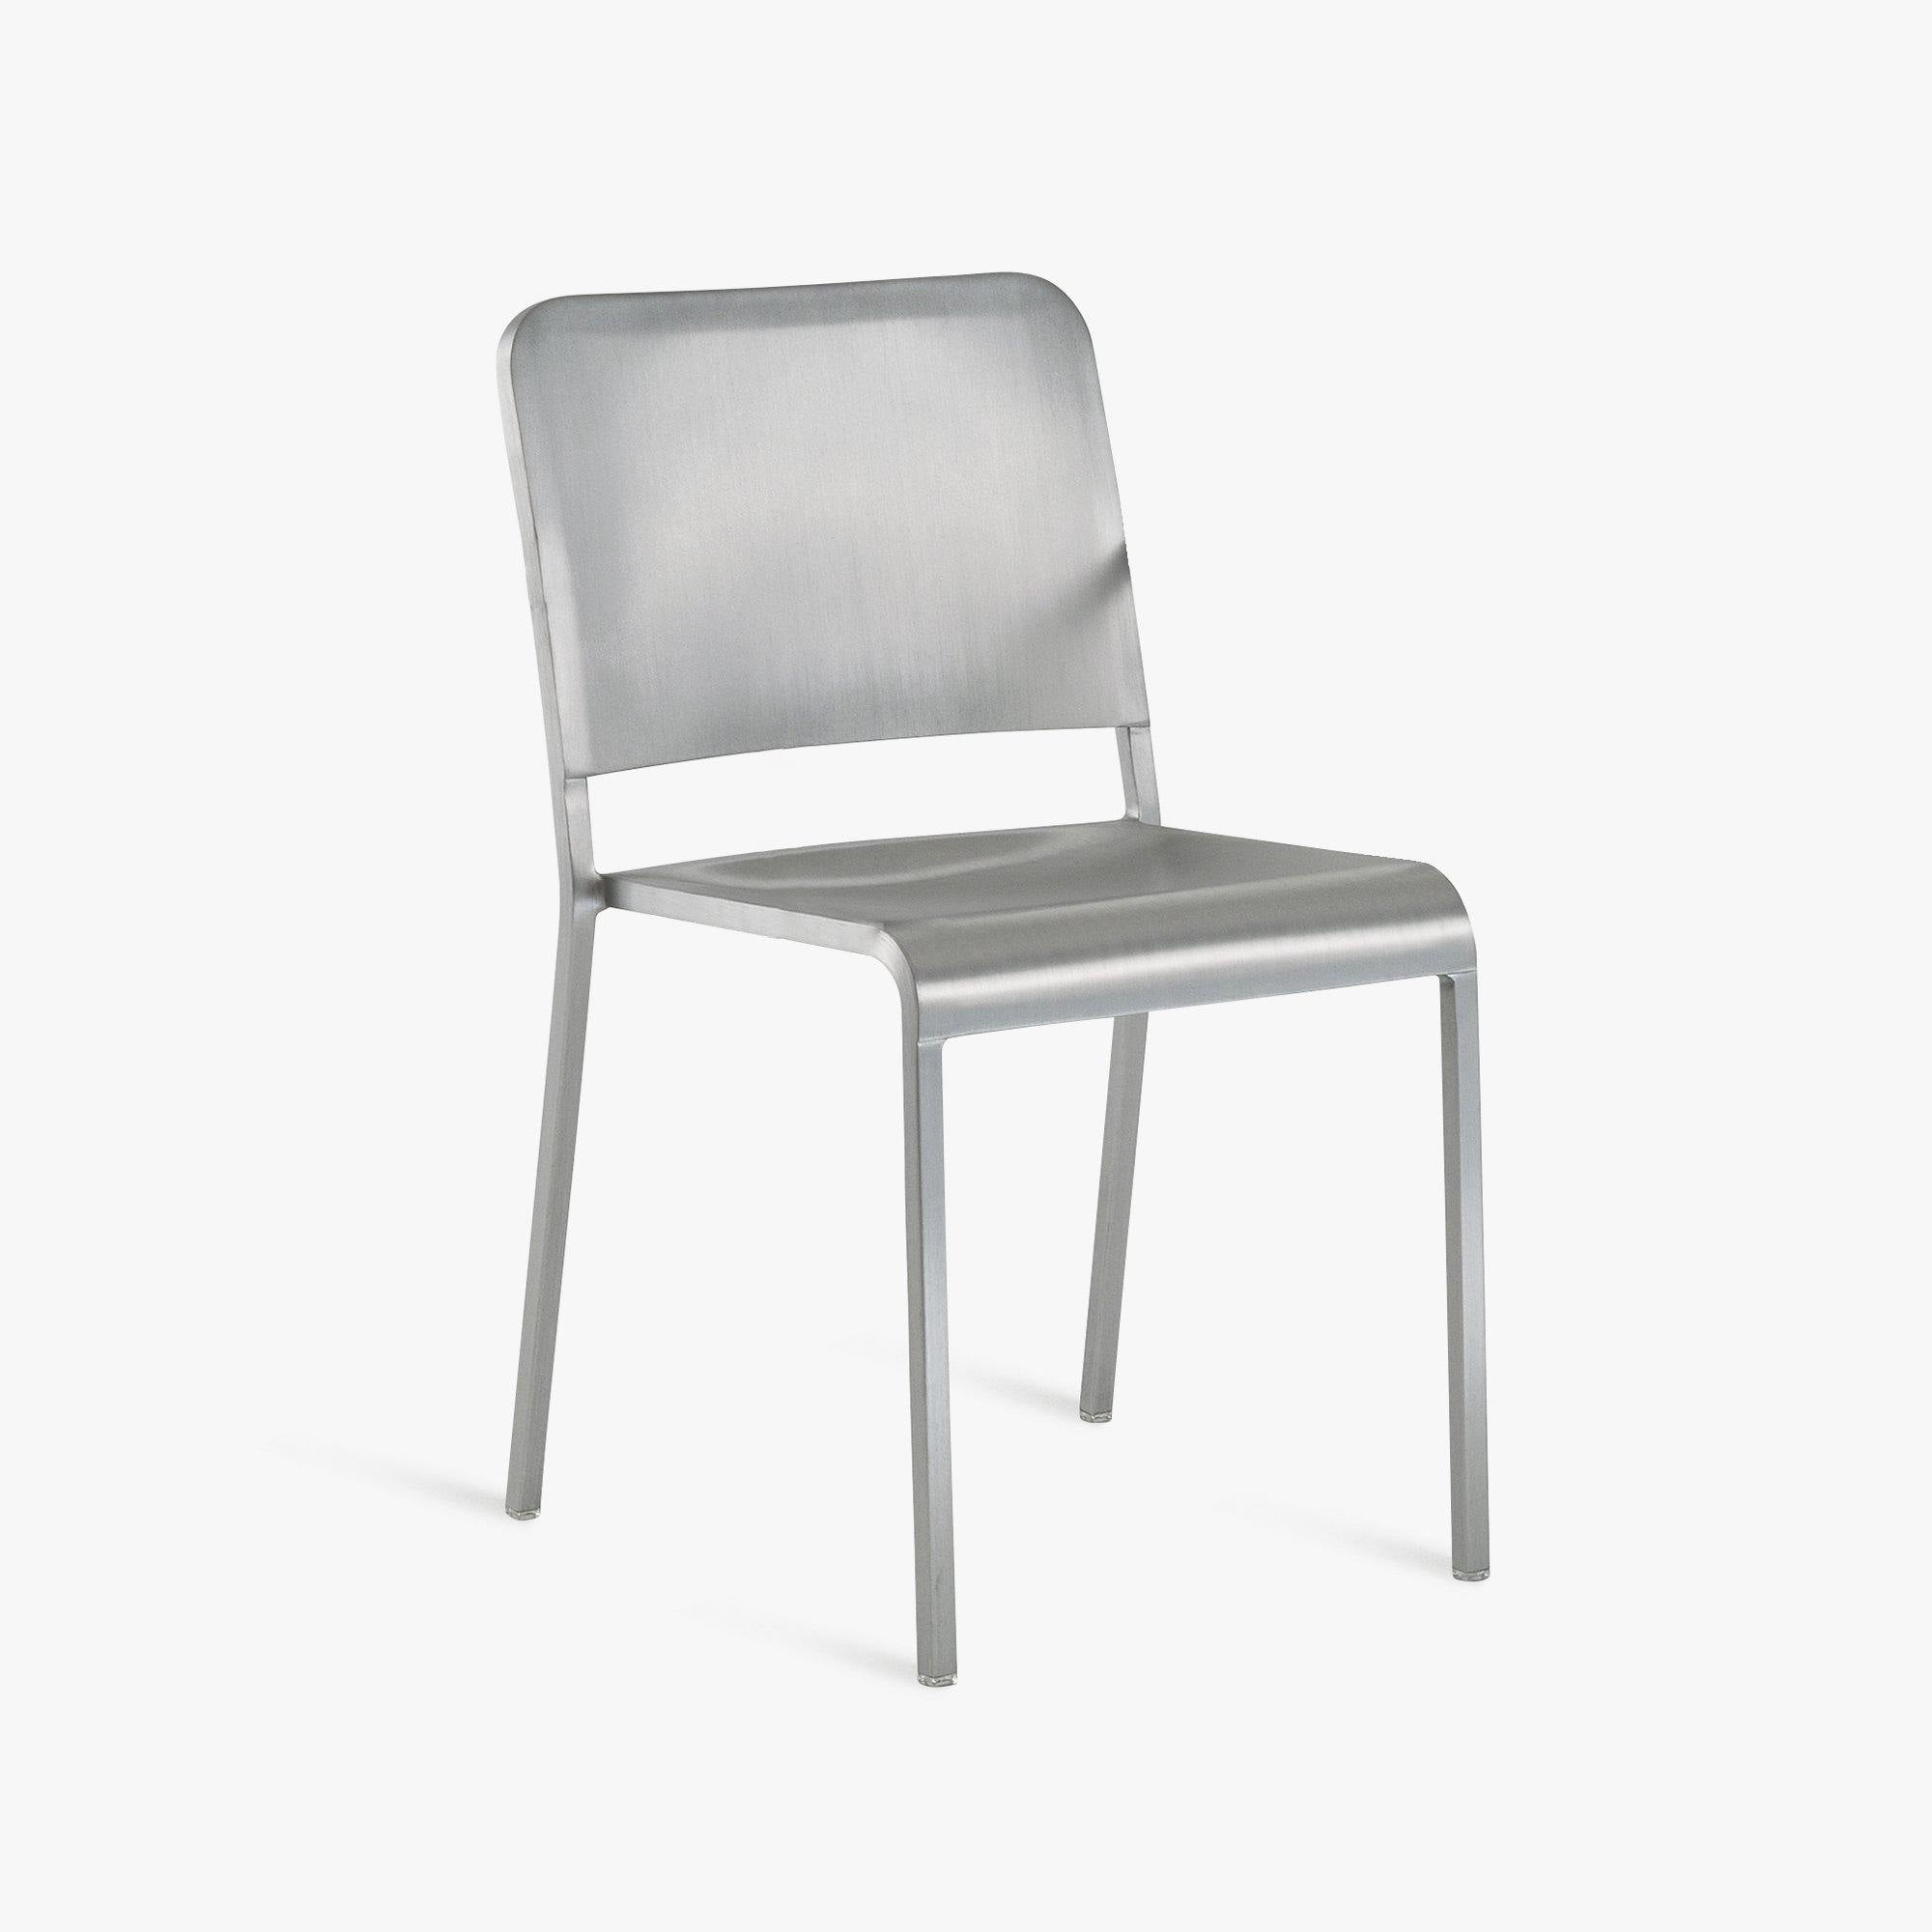 20-06 Stacking Chair by Norman Foster for Emeco - Rarify Inc.